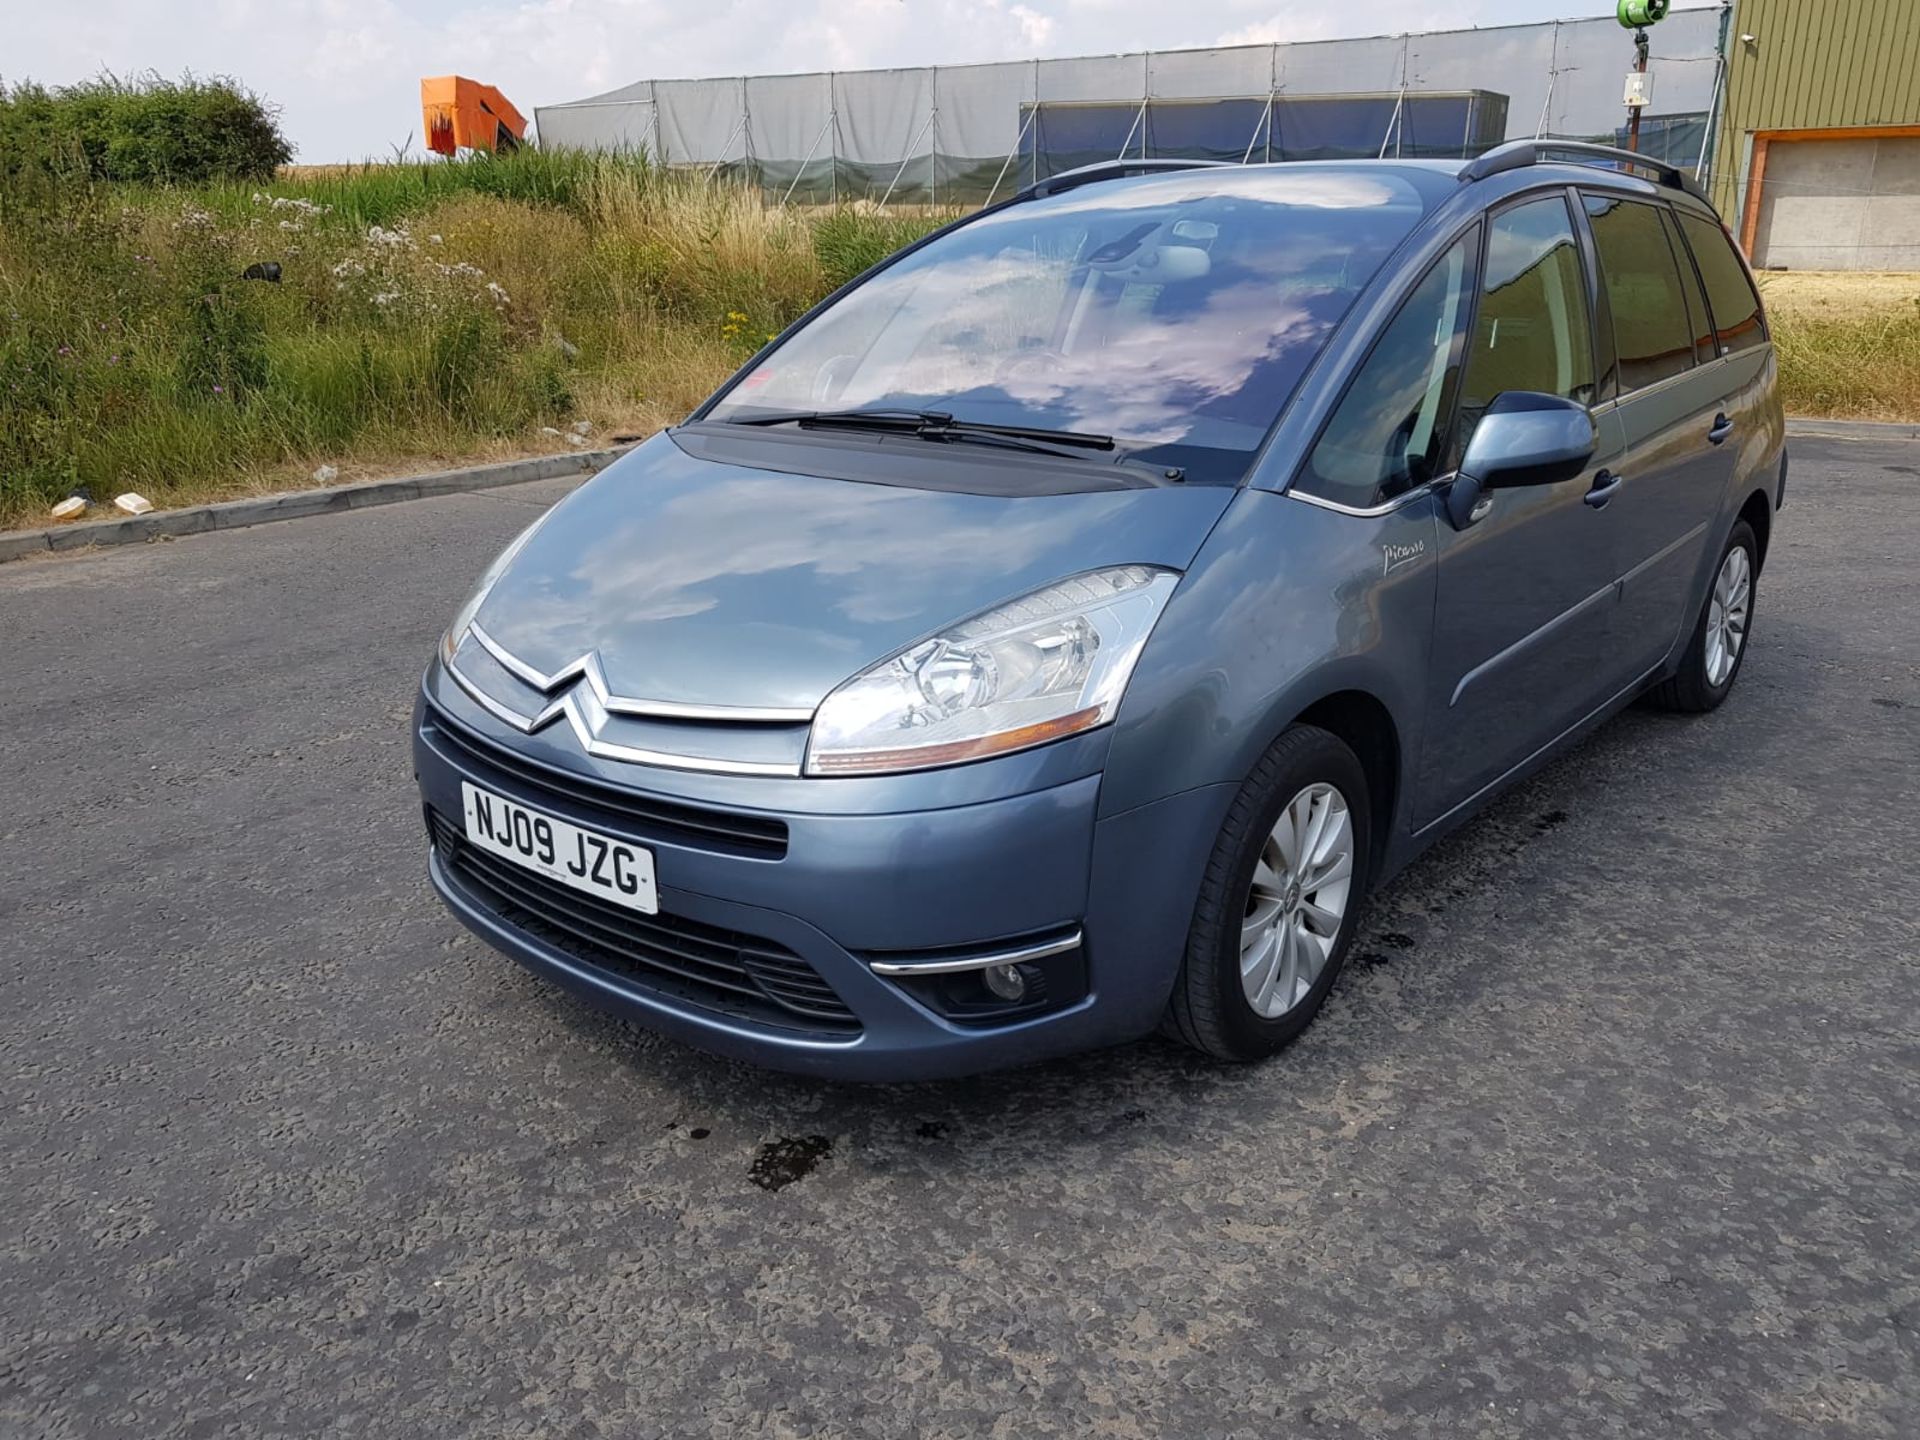 2009 CITROEN C4 PICASSO 7 SEATER EXCL HDI A - Image 2 of 20